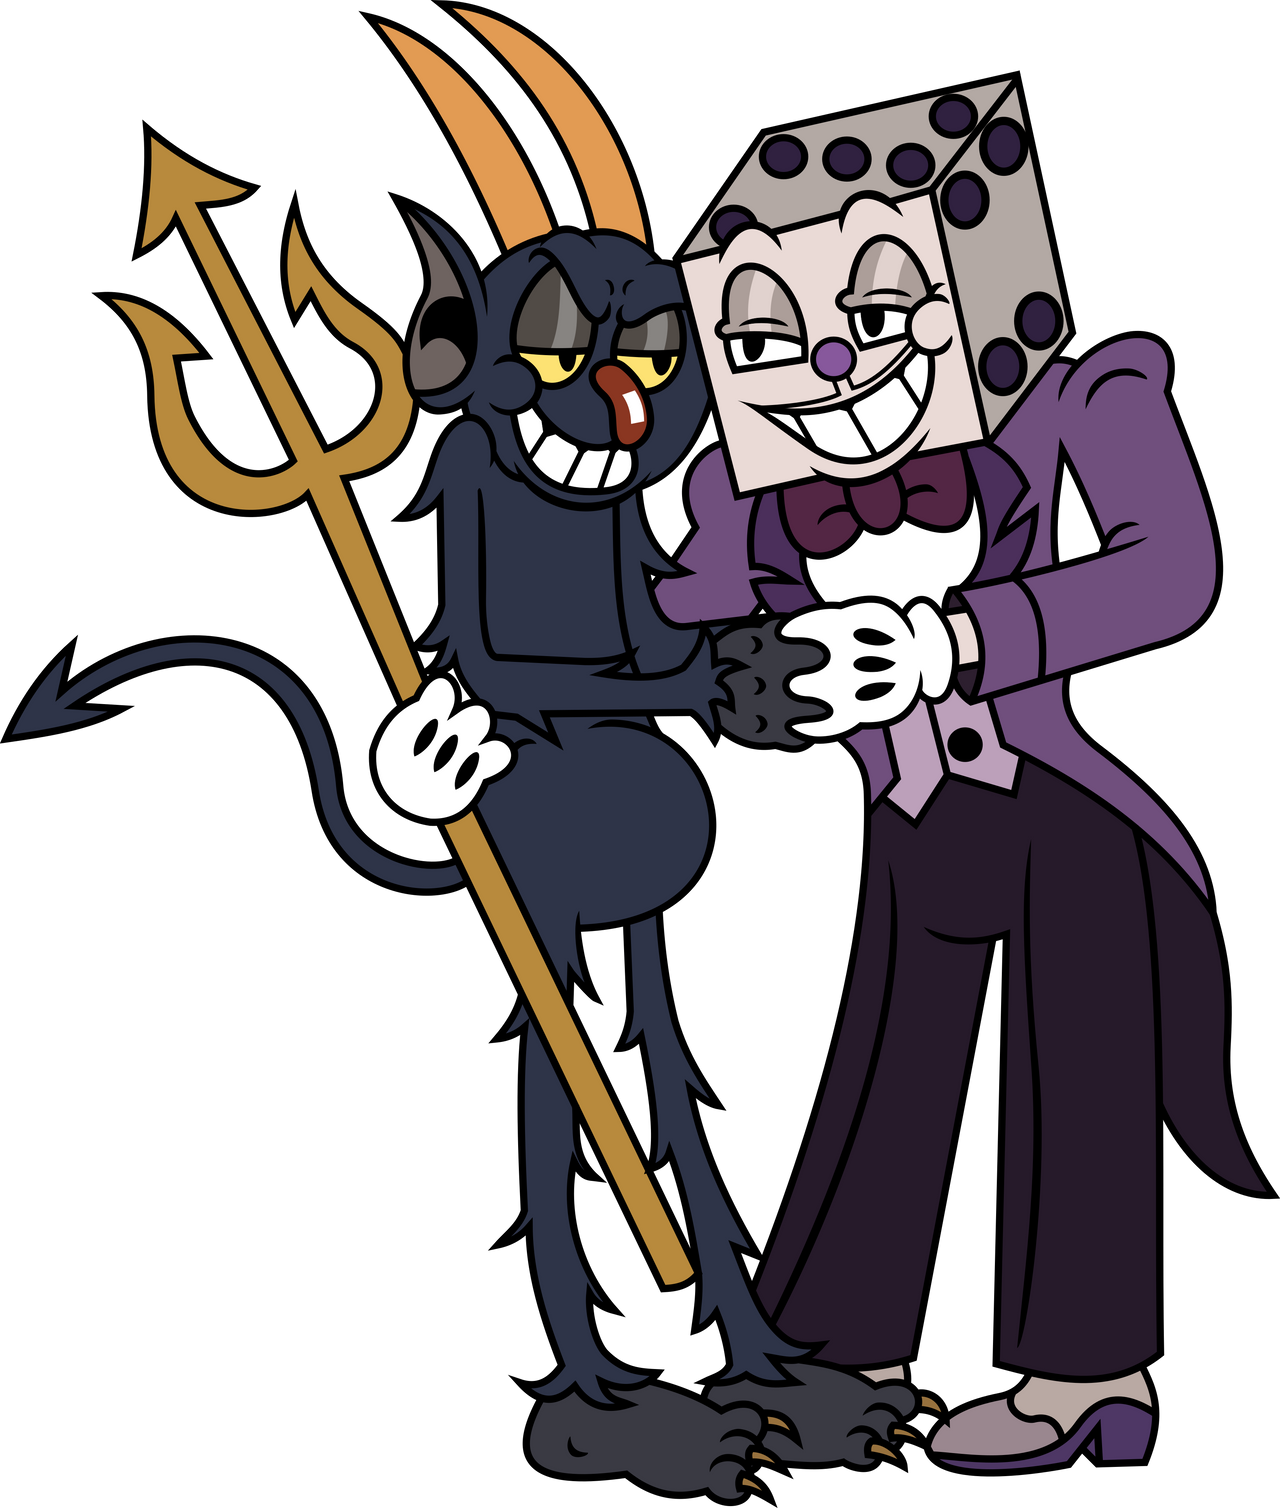 King Dice and the Devil by AllusionLunatic on DeviantArt